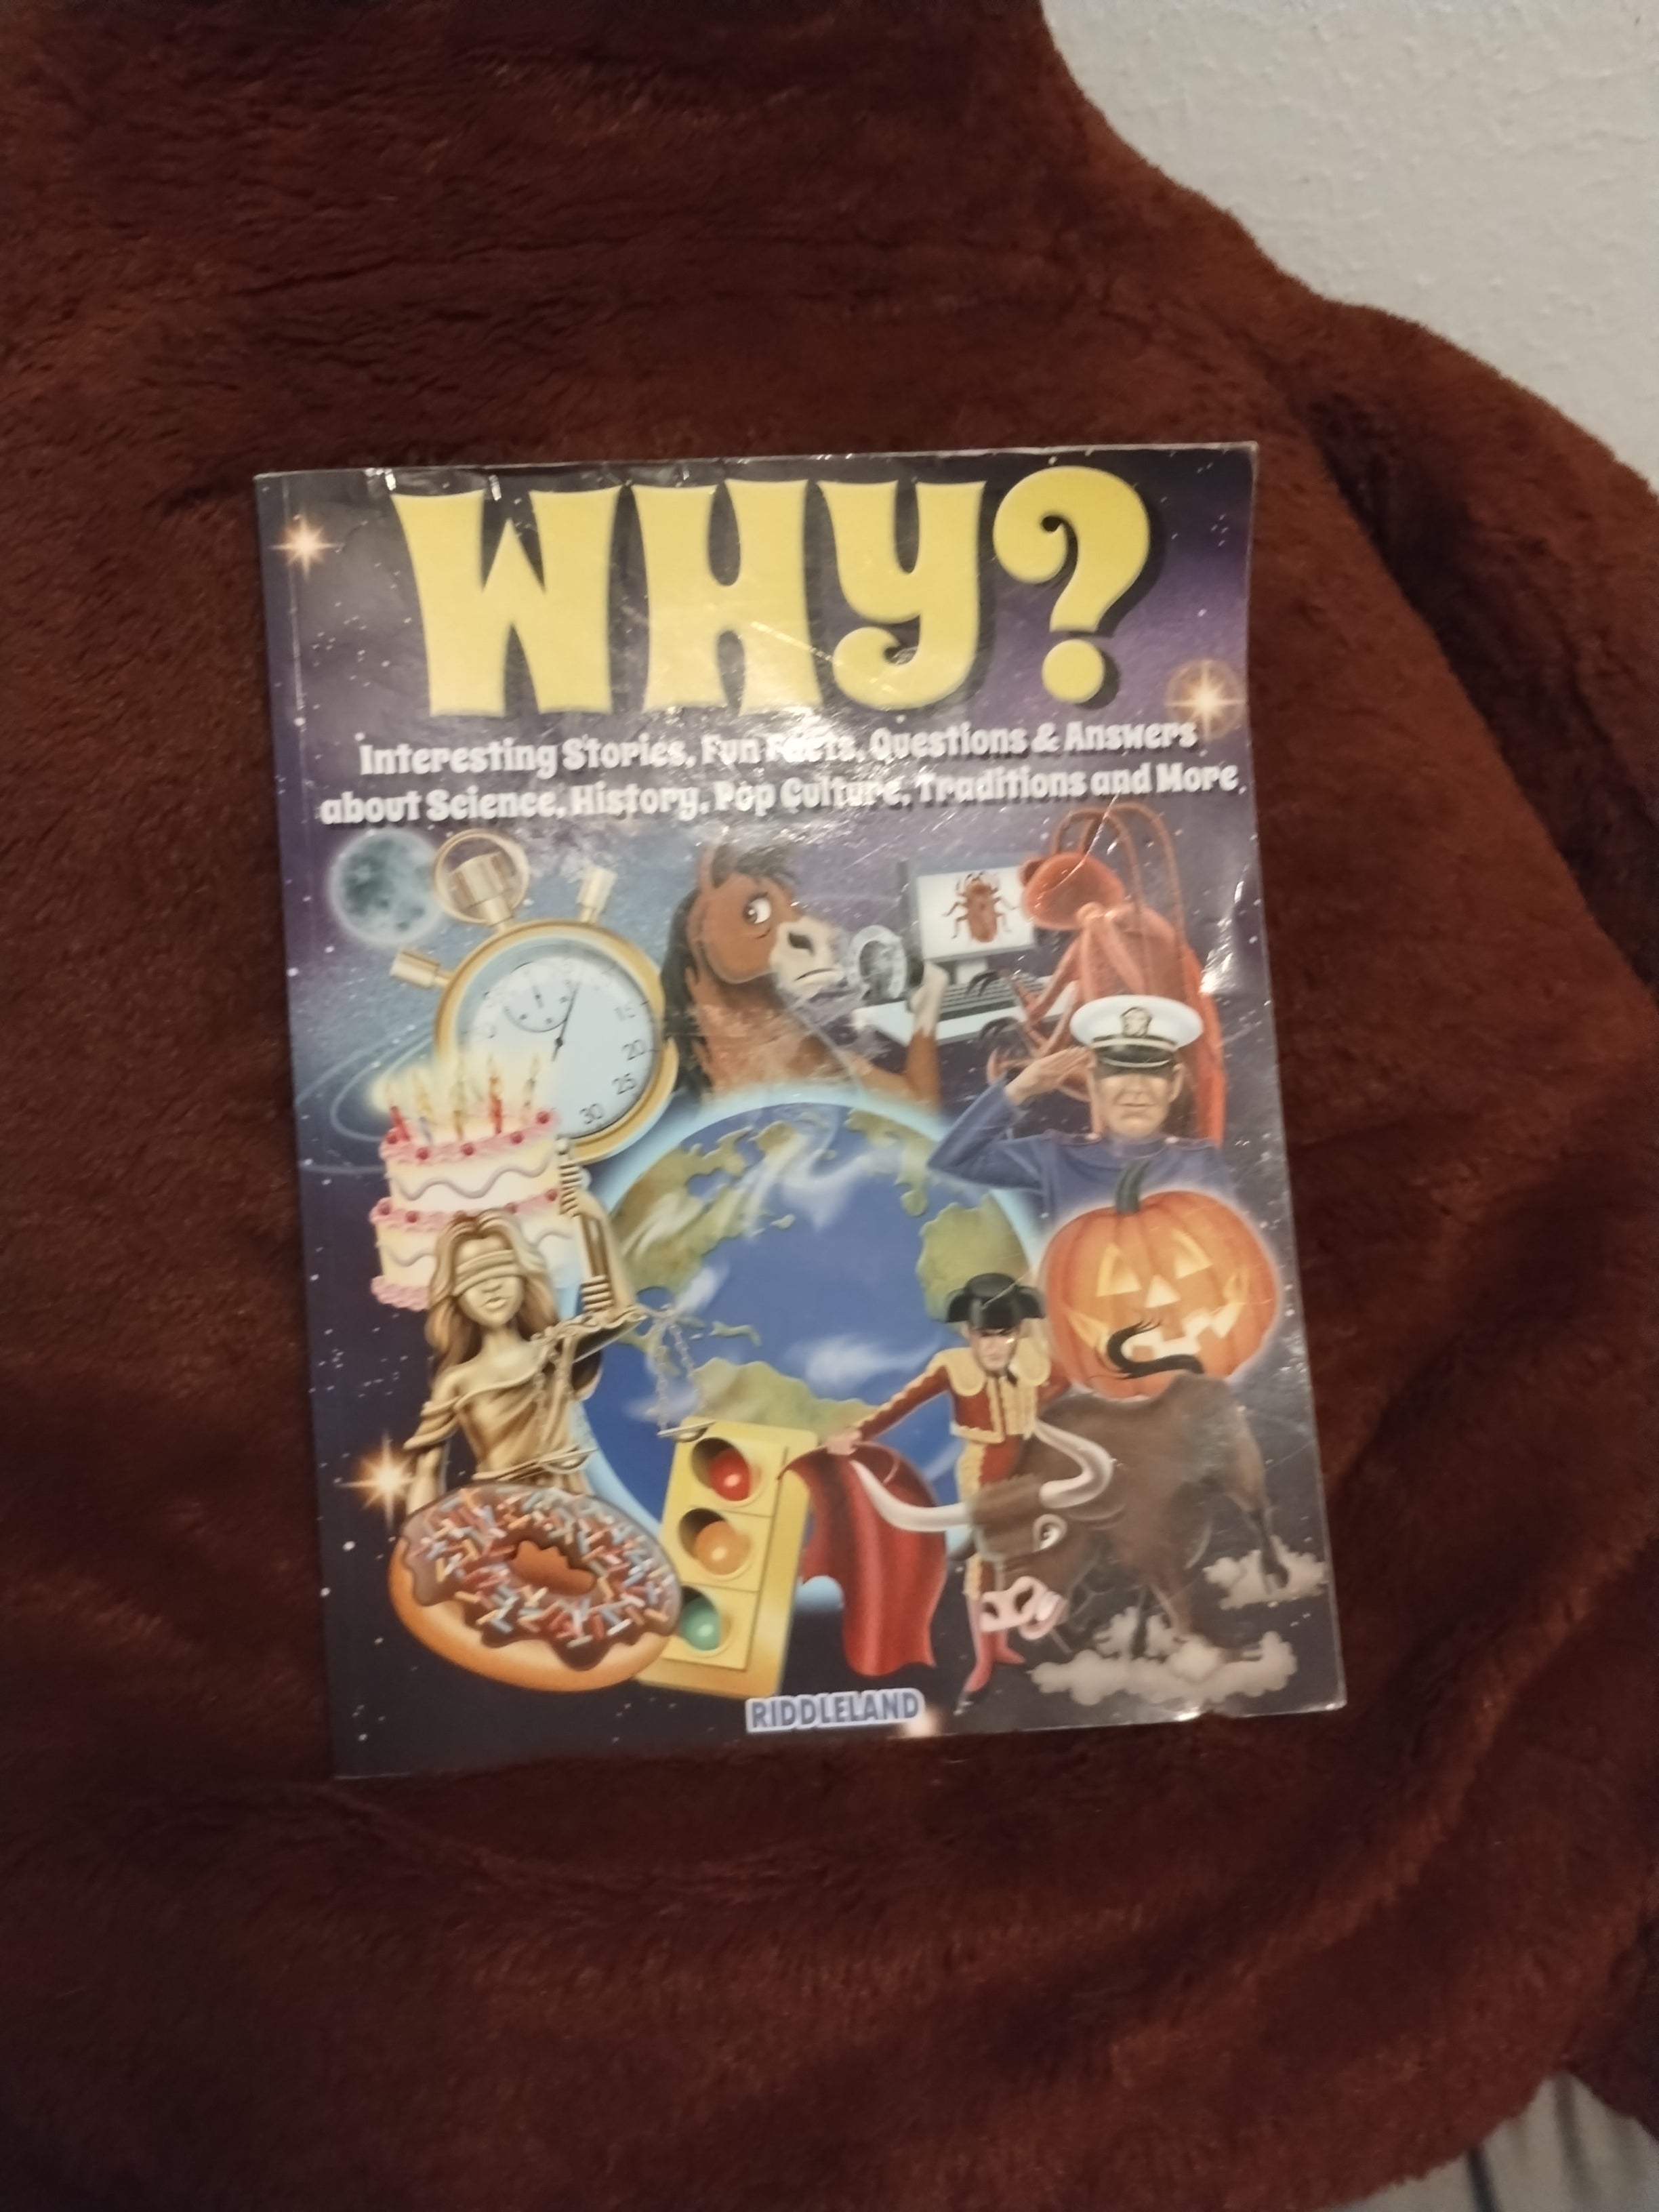 Culture,　by　Facts,　about　Pop　Paperback　Questions　Stories,　Fun　Riddleland,　Traditions　More　and　Answers　History,　Science,　Pangobooks　Why?　Interesting